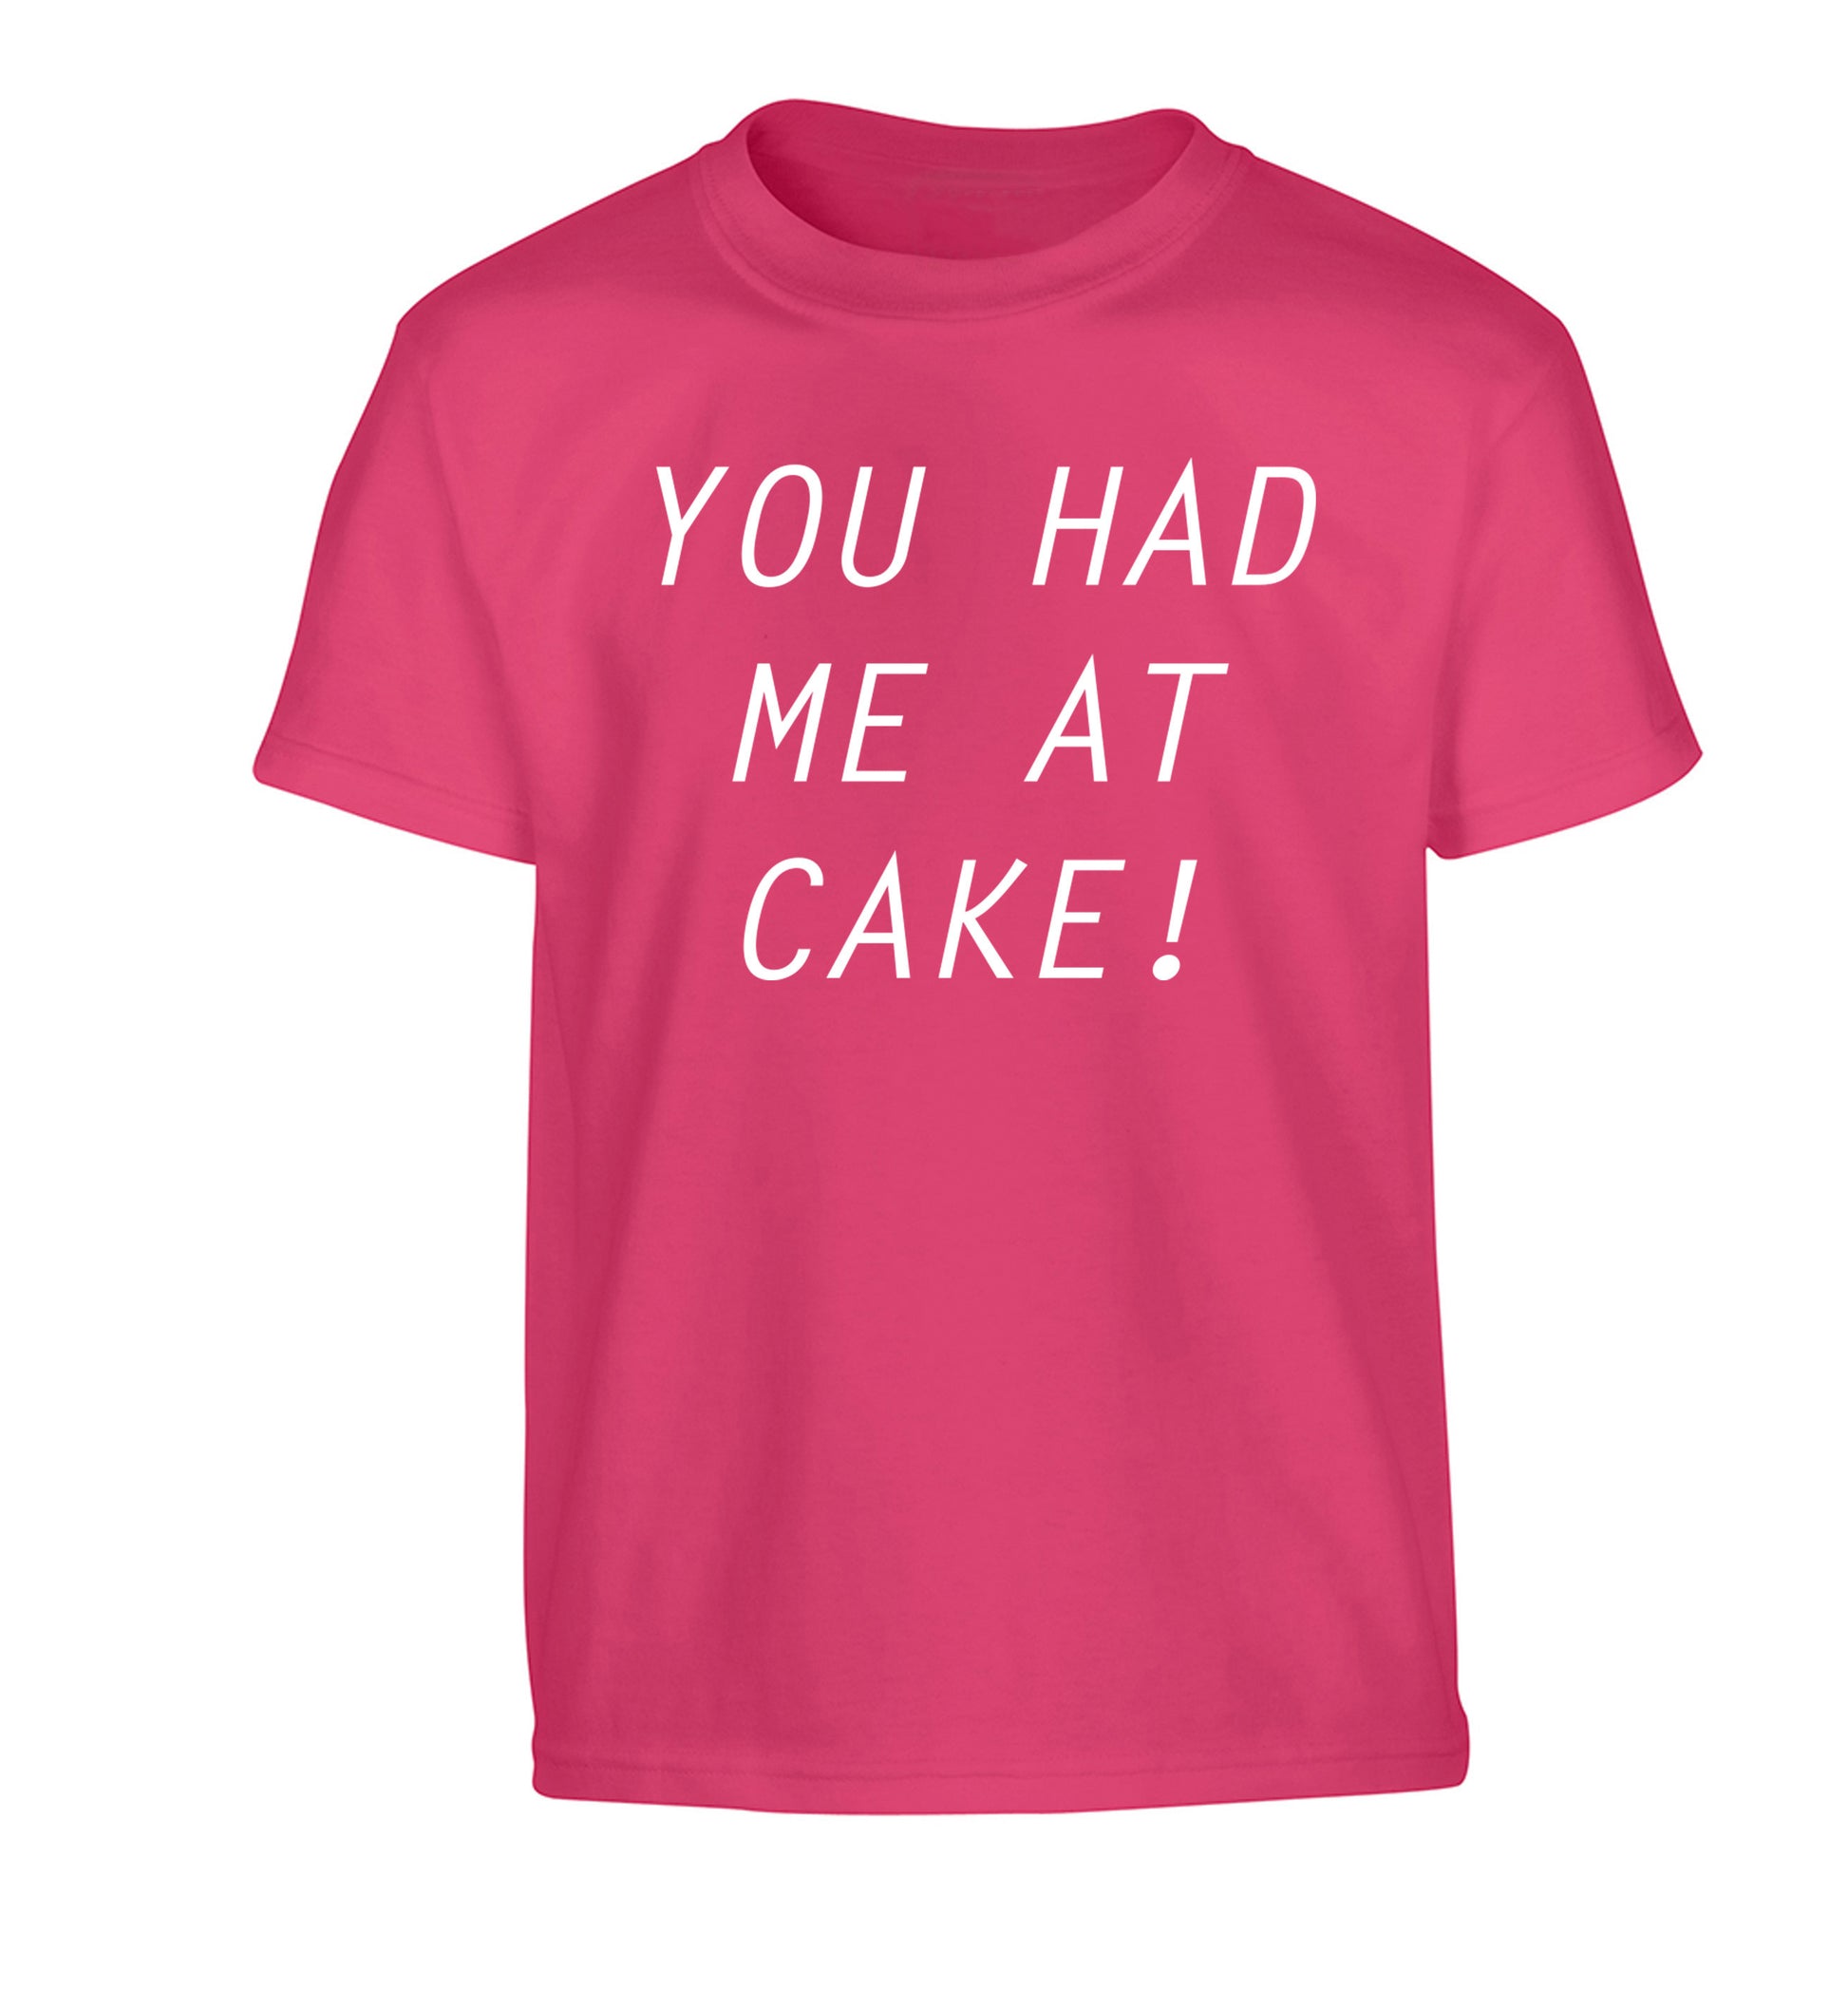 You had me at cake Children's pink Tshirt 12-14 Years